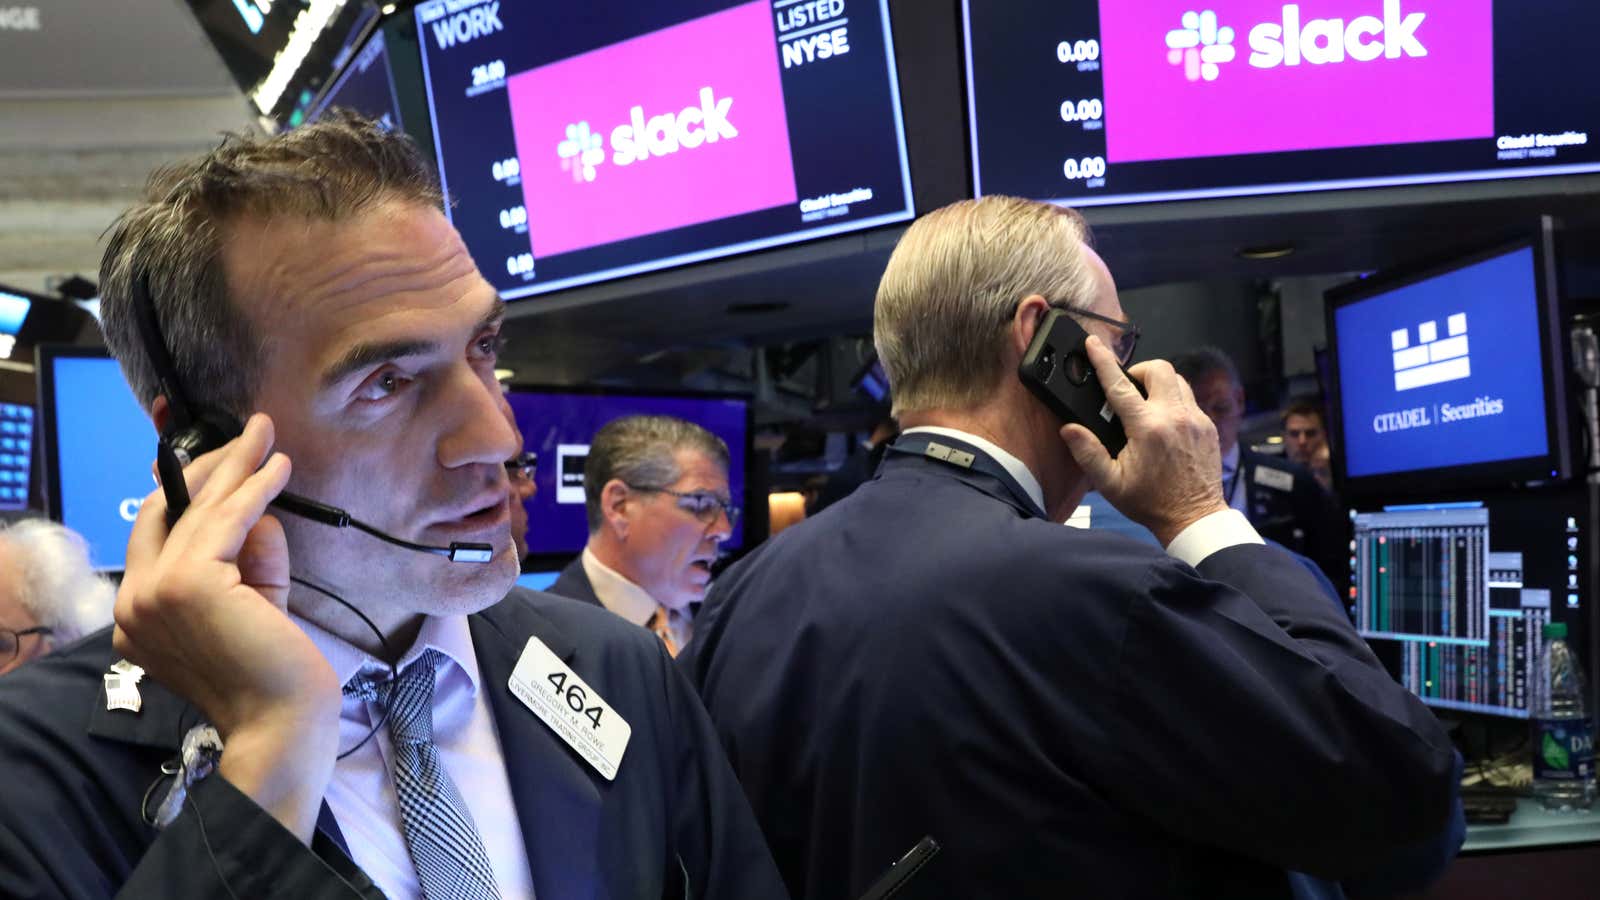 REFILE – CORRECTING INFORMATION AND SLUG Traders work on the floor at the New York Stock Exchange (NYSE) during the Slack Technologies Inc. direct listing in New York, U.S. June 20, 2019.  REUTERS/Brendan McDermid